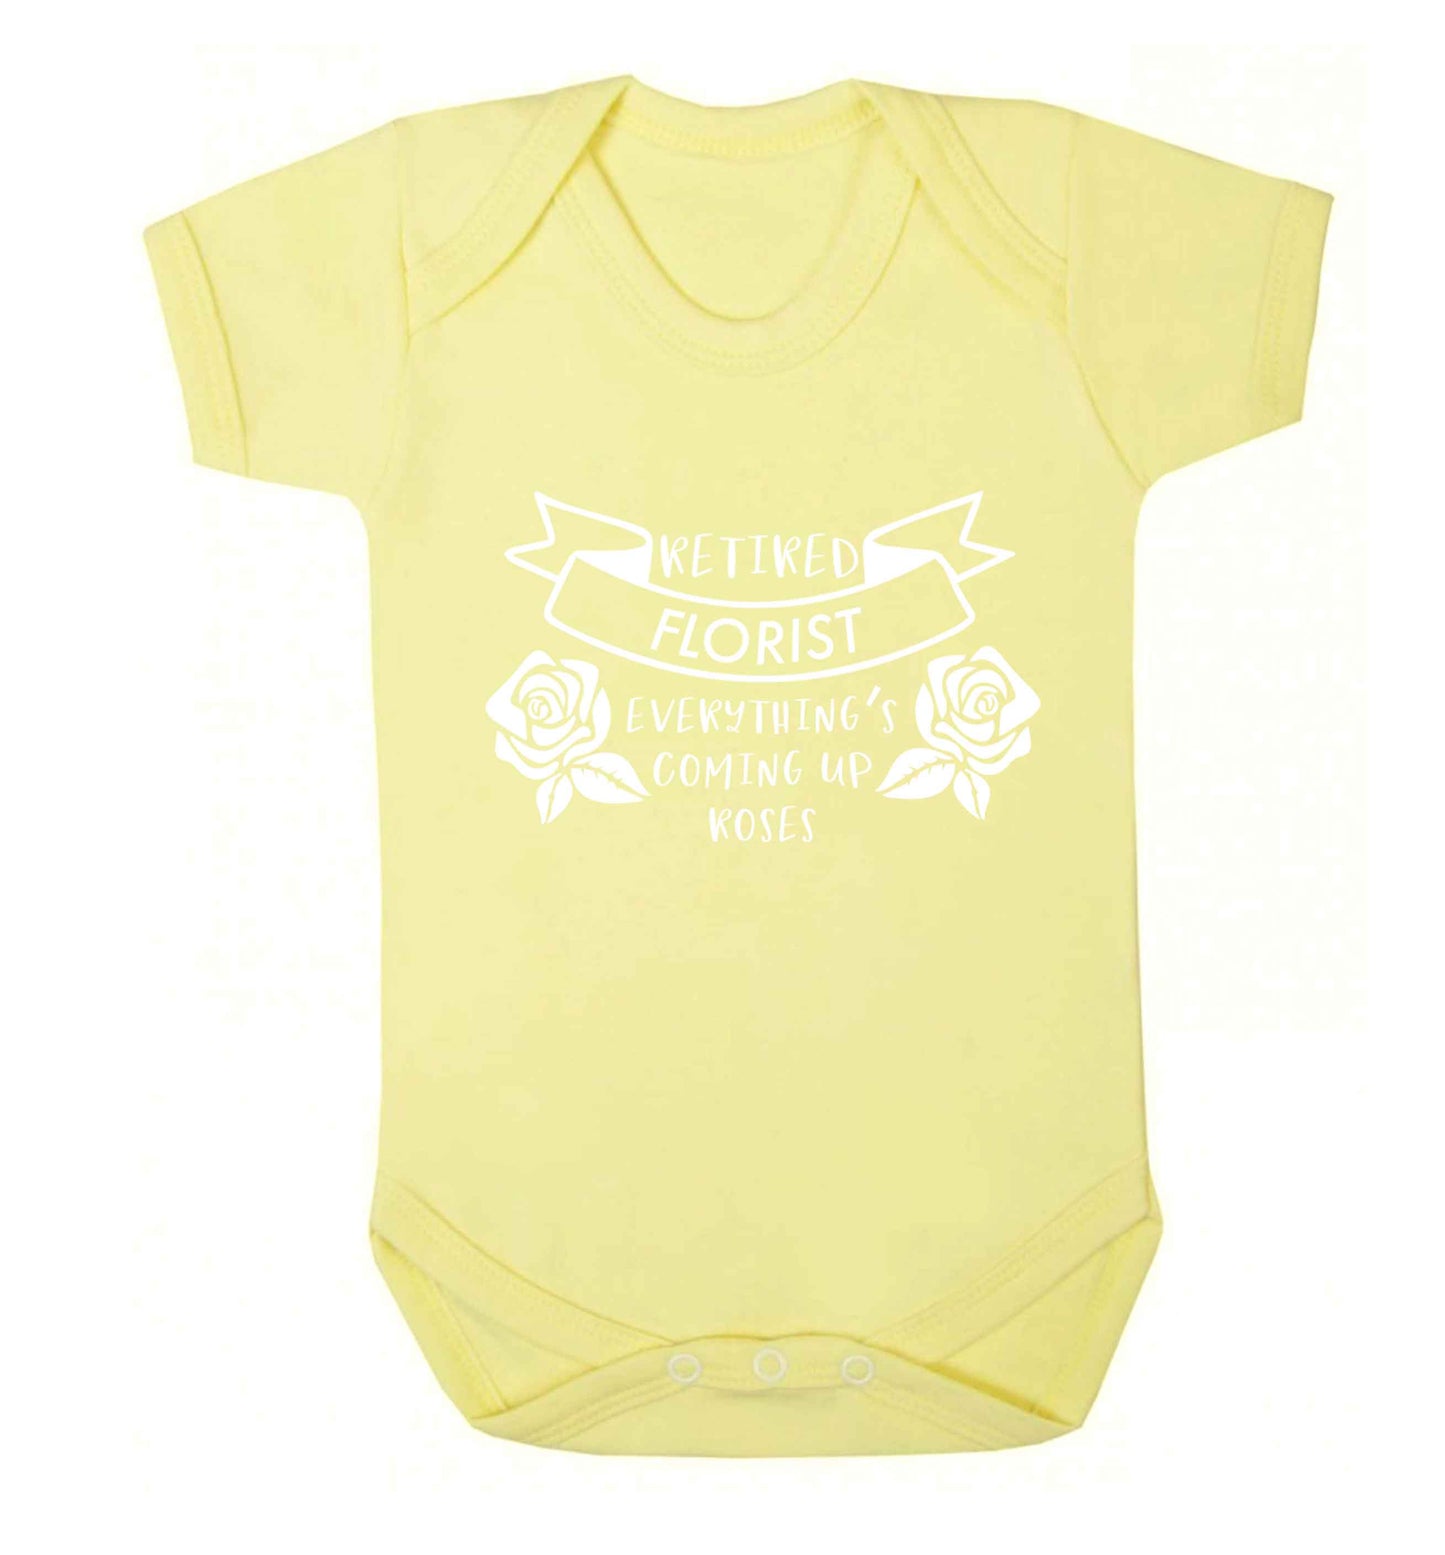 Retired florist everything's coming up roses Baby Vest pale yellow 18-24 months